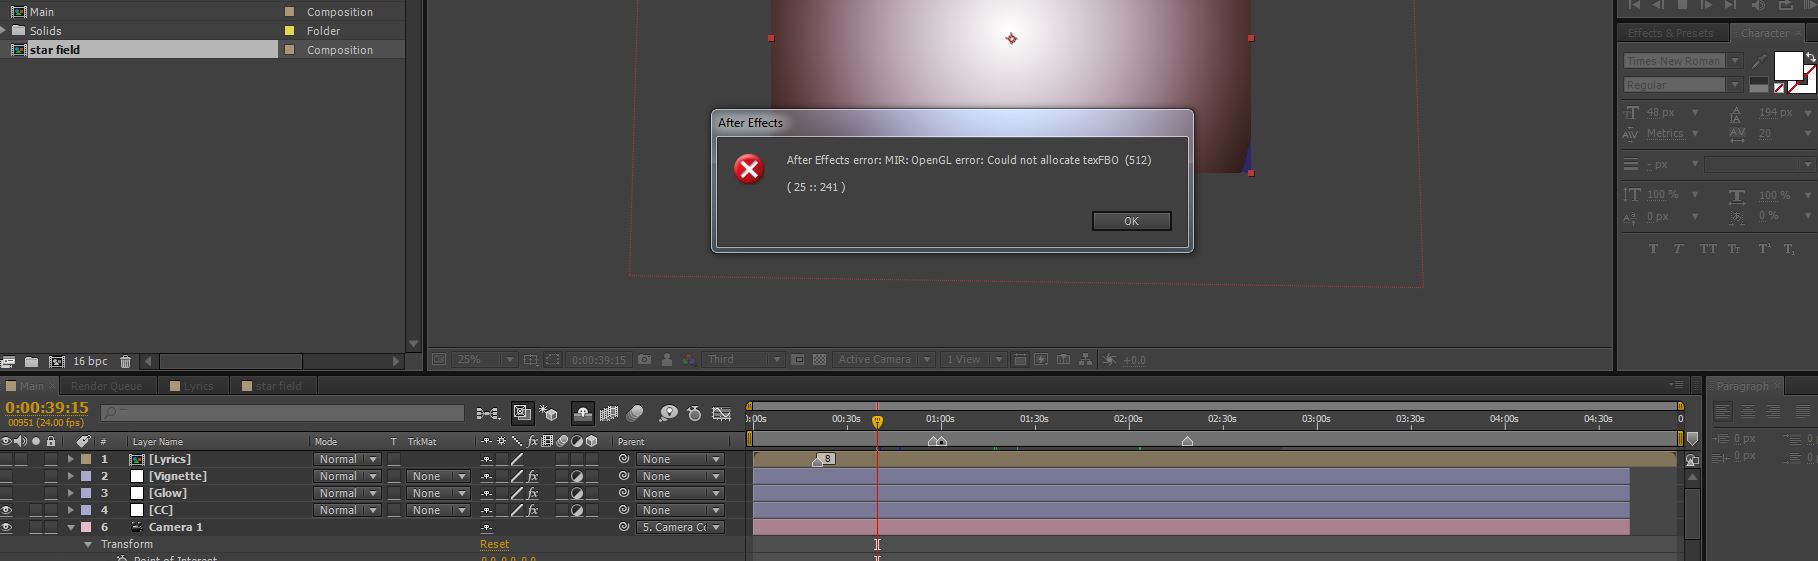 Solved Help After Effects Error Mir Opengl Error Coul Adobe Support Community 8812033 - roblox ads error ga 150mf